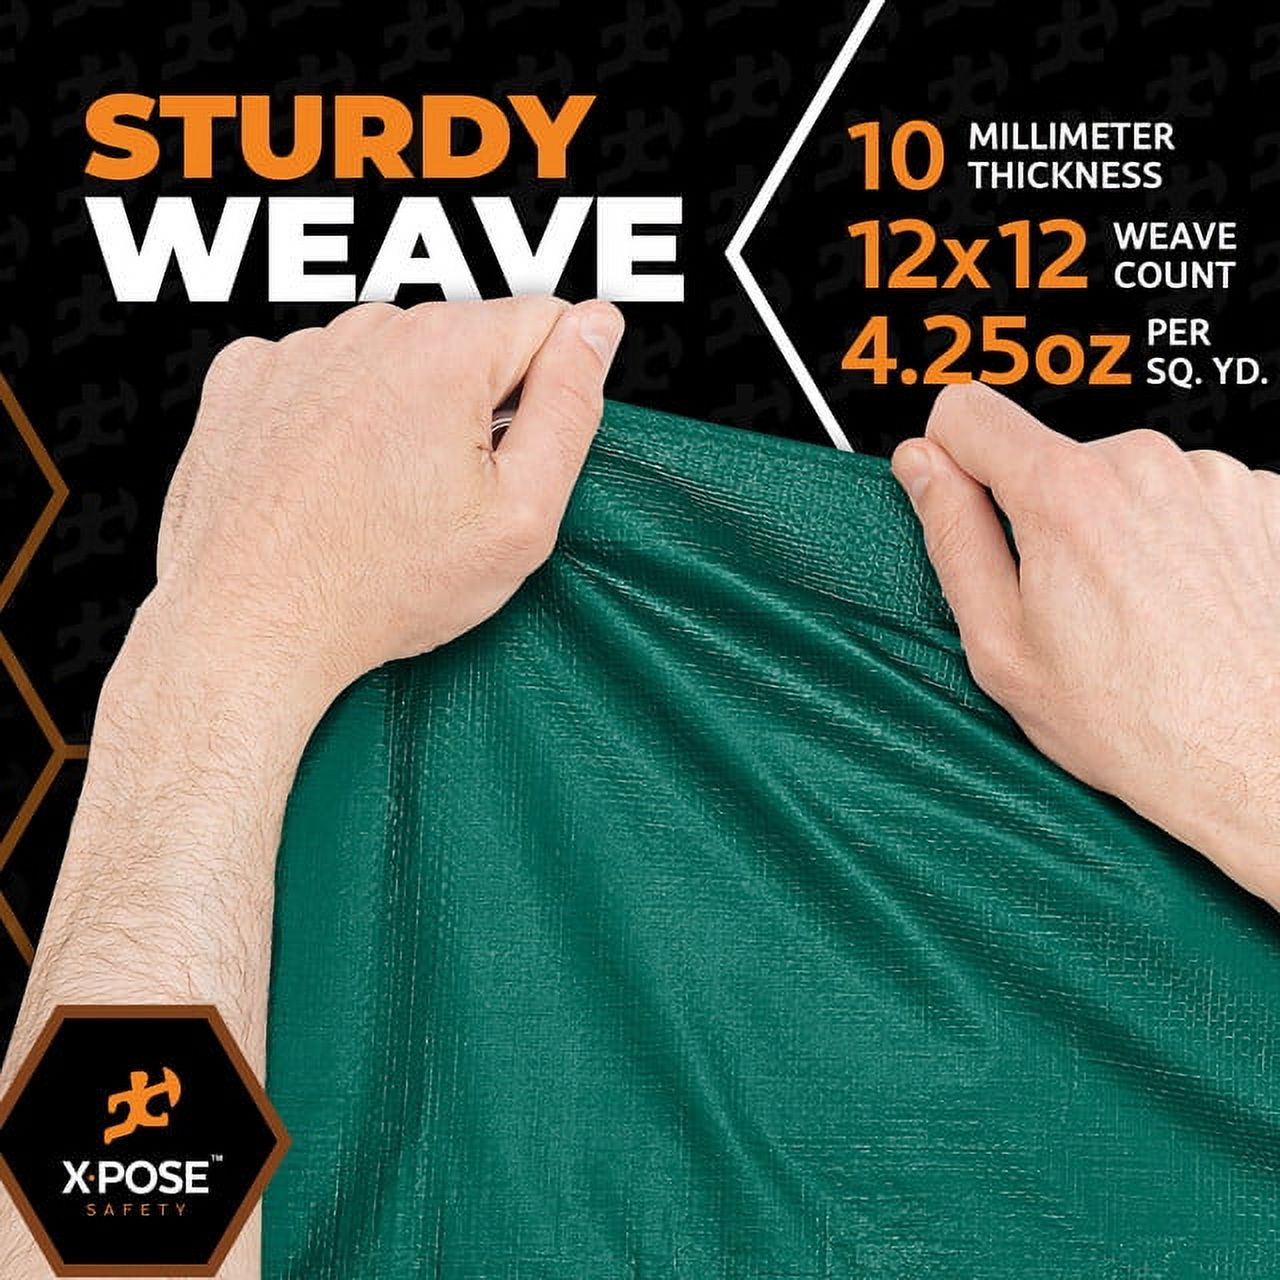 Heavy Duty Poly Tarp 12 Feet x 25 Feet 10 Mil Thick Waterproof, UV Blocking Protective Cover - Reversible Green and Black - Laminated Coating - Rustproof Grommets - by Xpose Safety - image 5 of 8